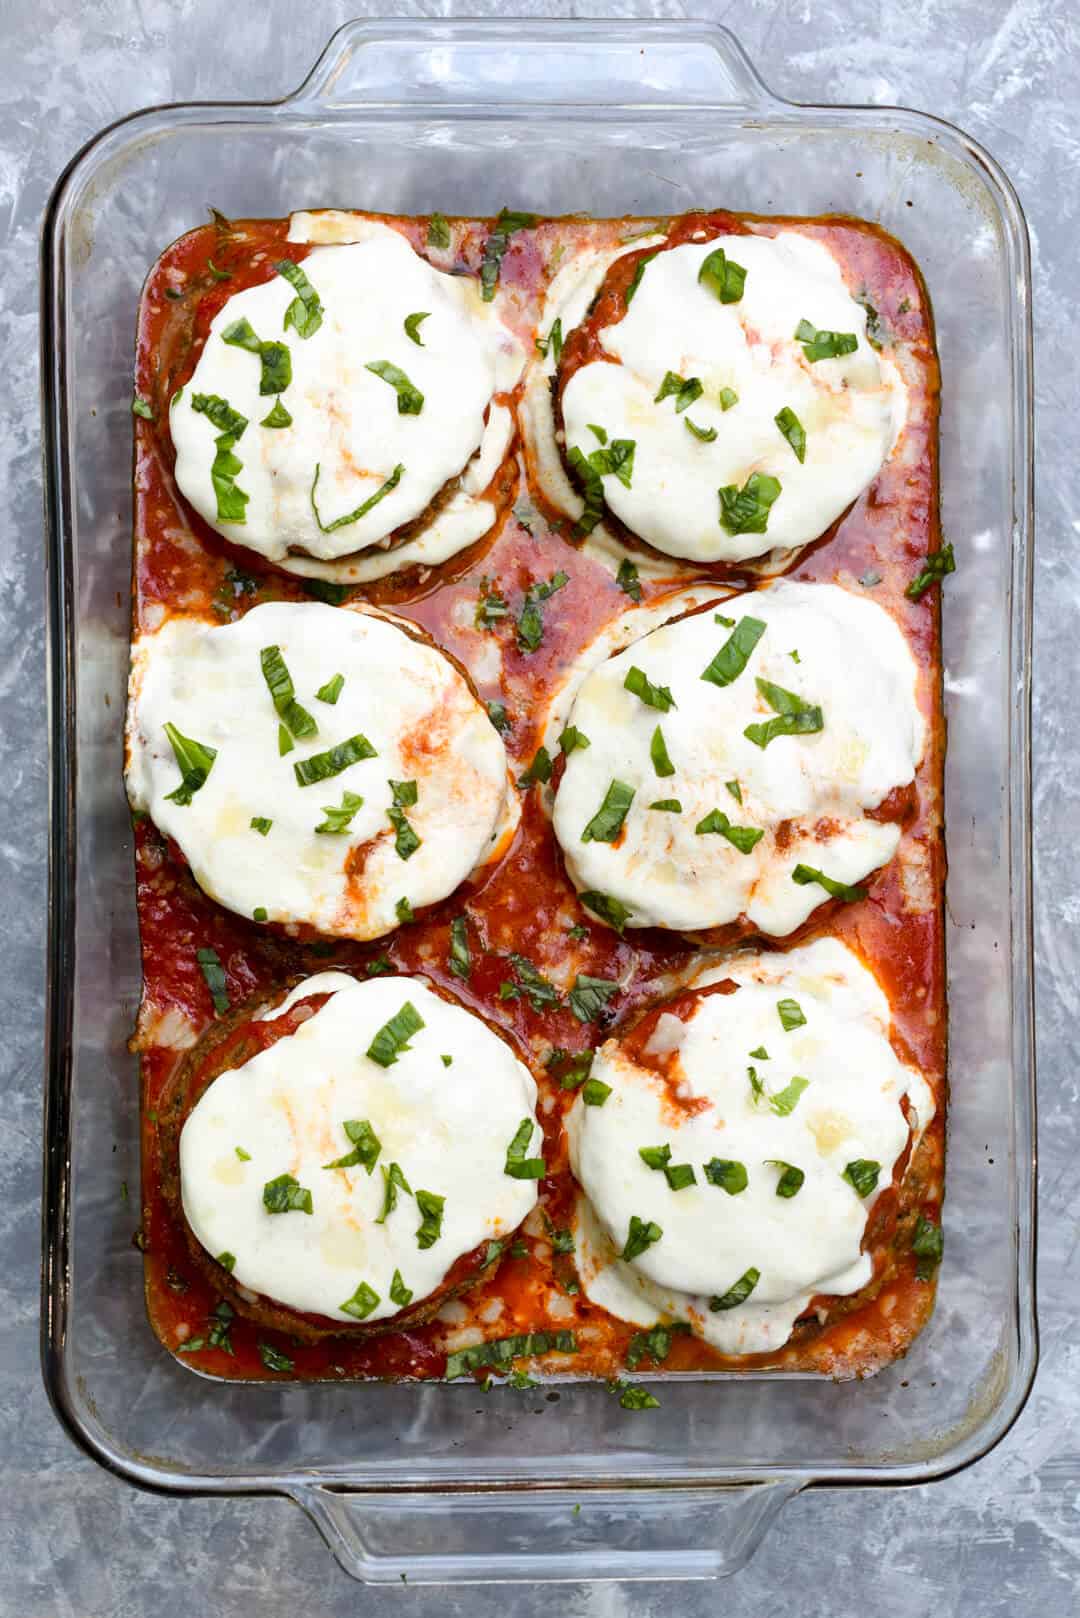 Baked Eggplant Parmesan in a baking dish from over the top.